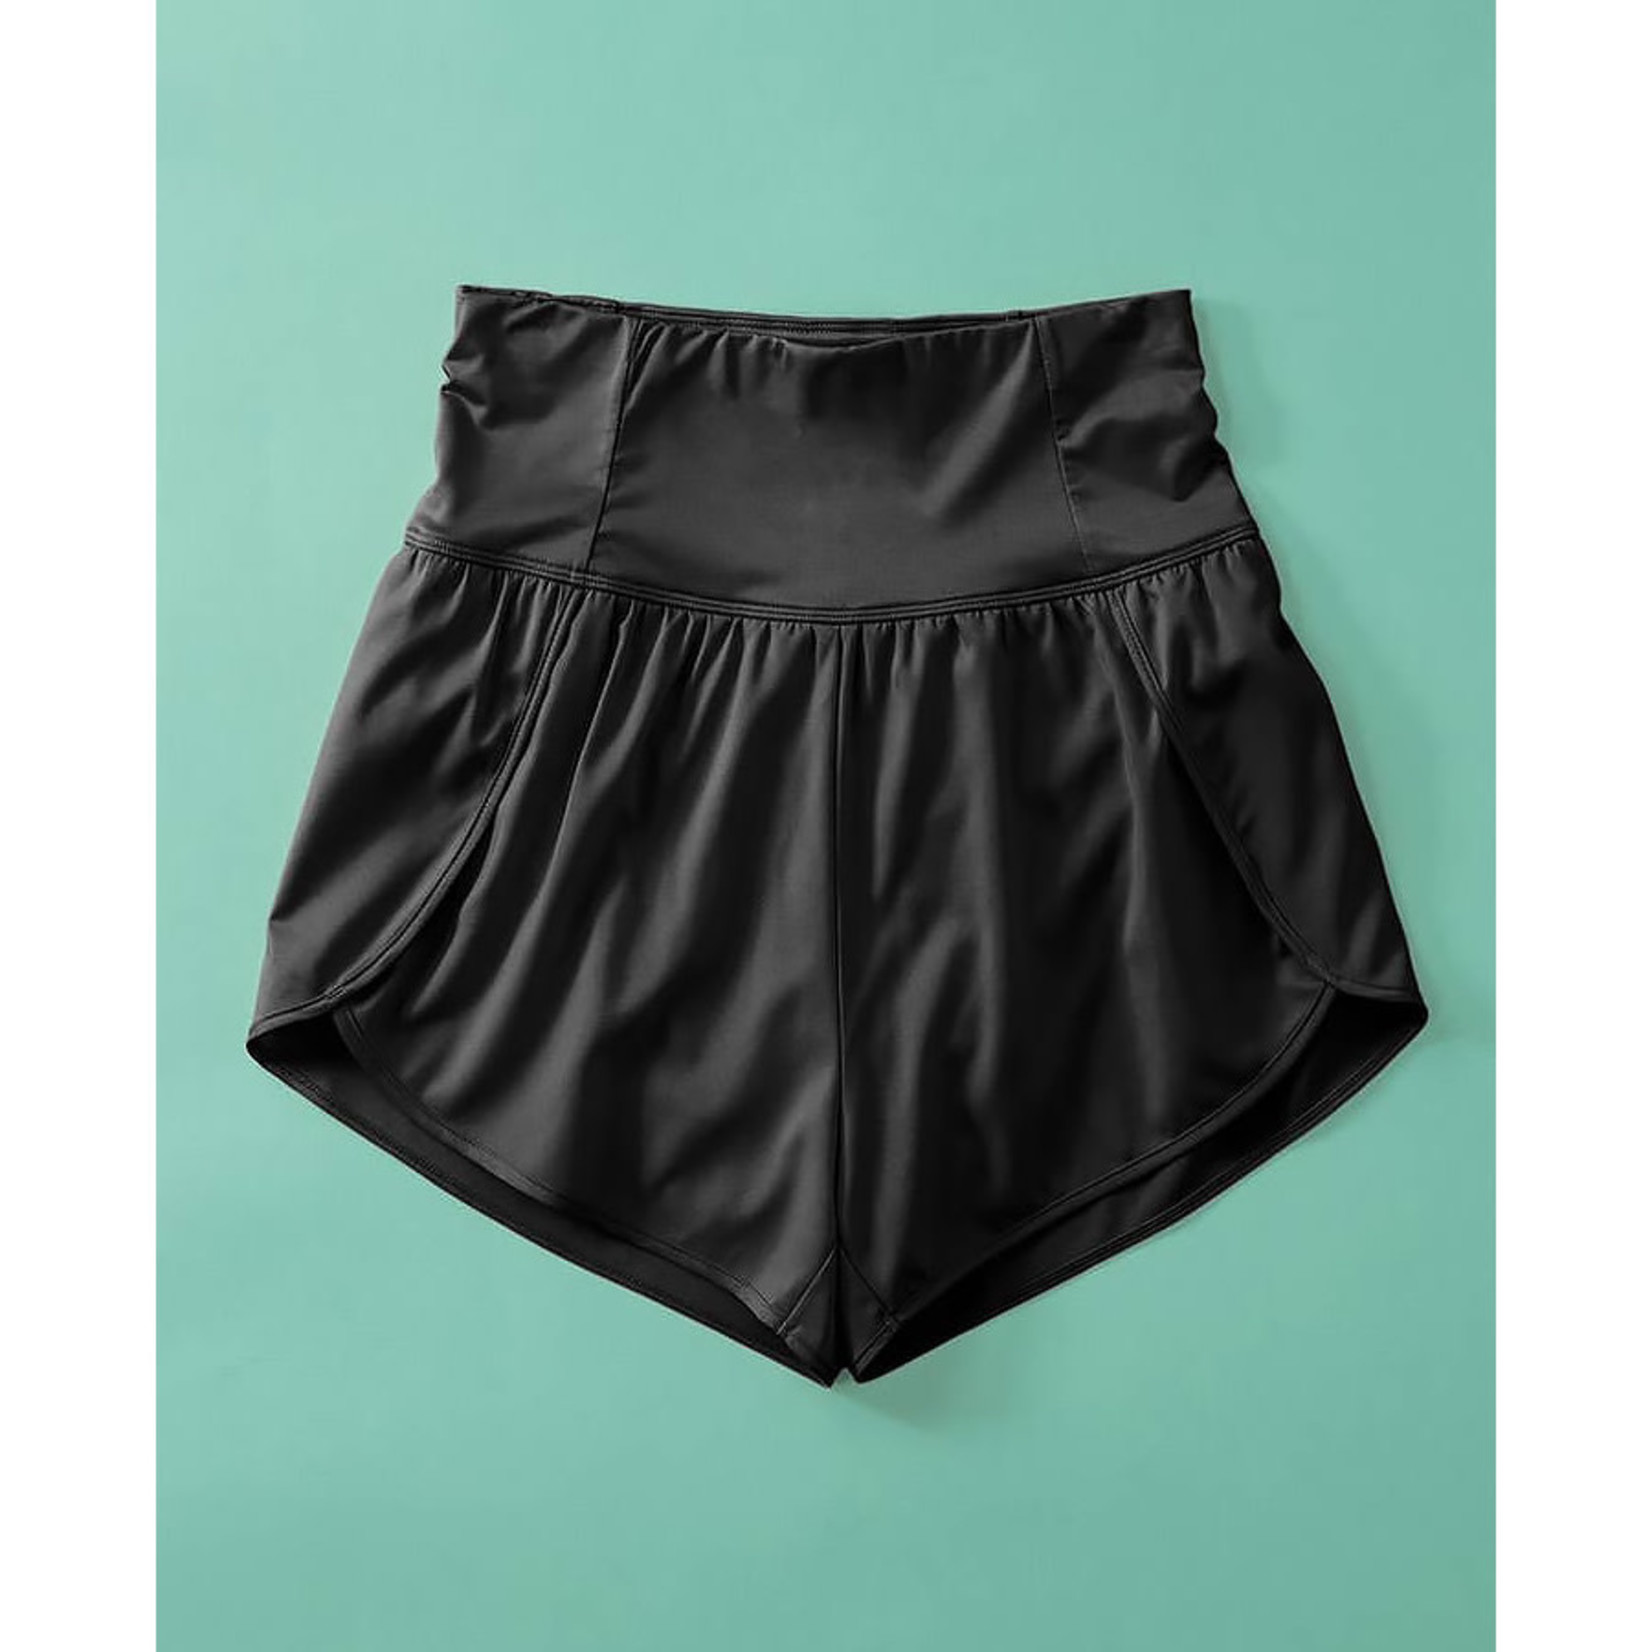 Urban Daizy Let's Get Physical Track Shorts